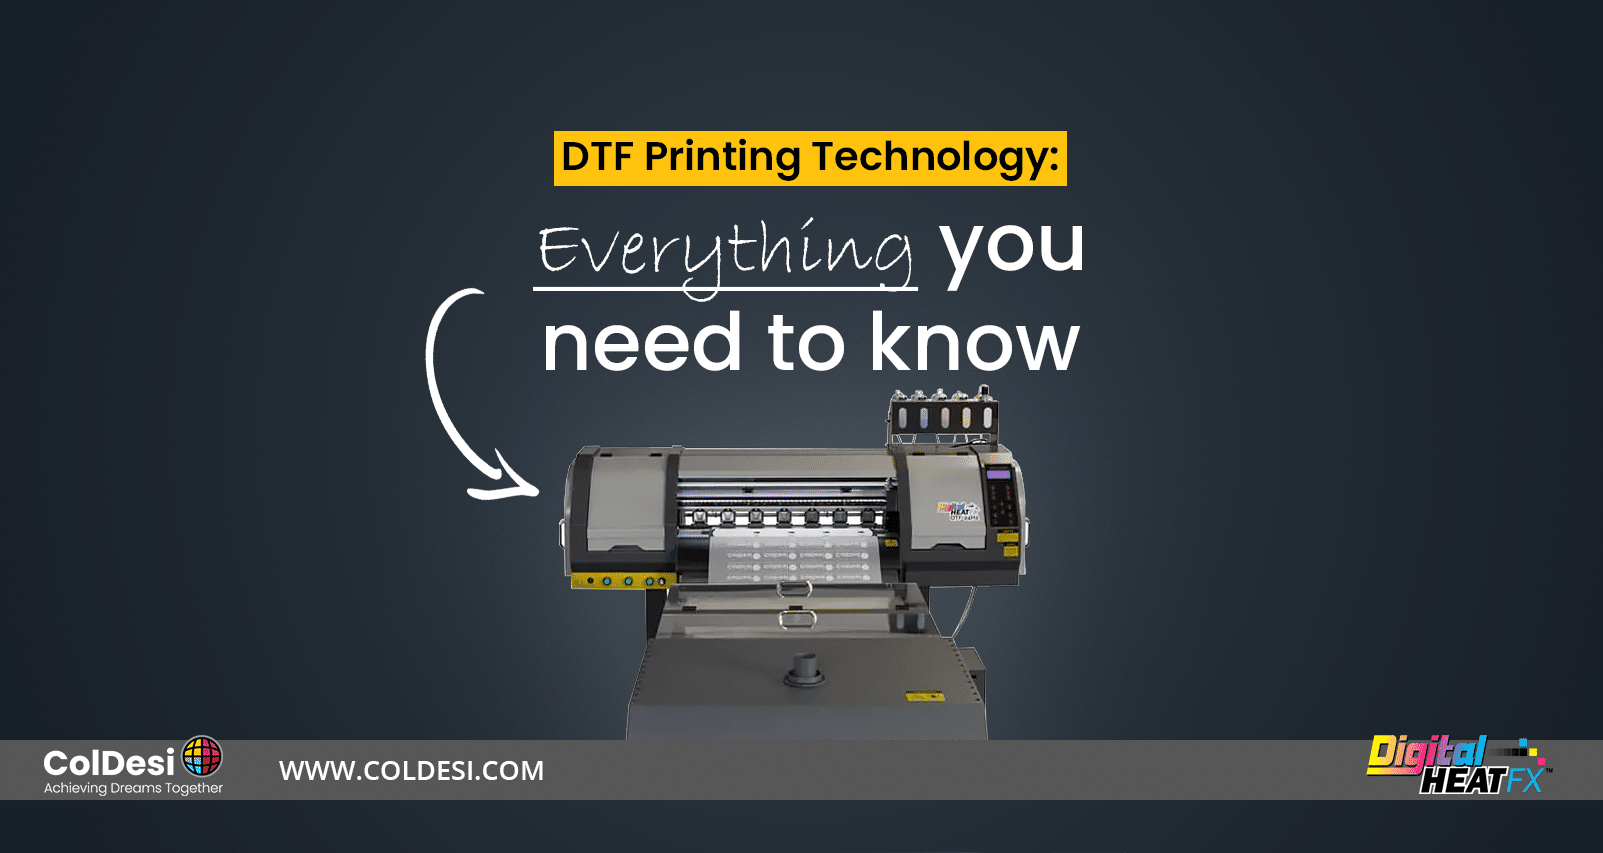 DTF Printing Technology: Everything You Need to Know, from Costs to Benefits